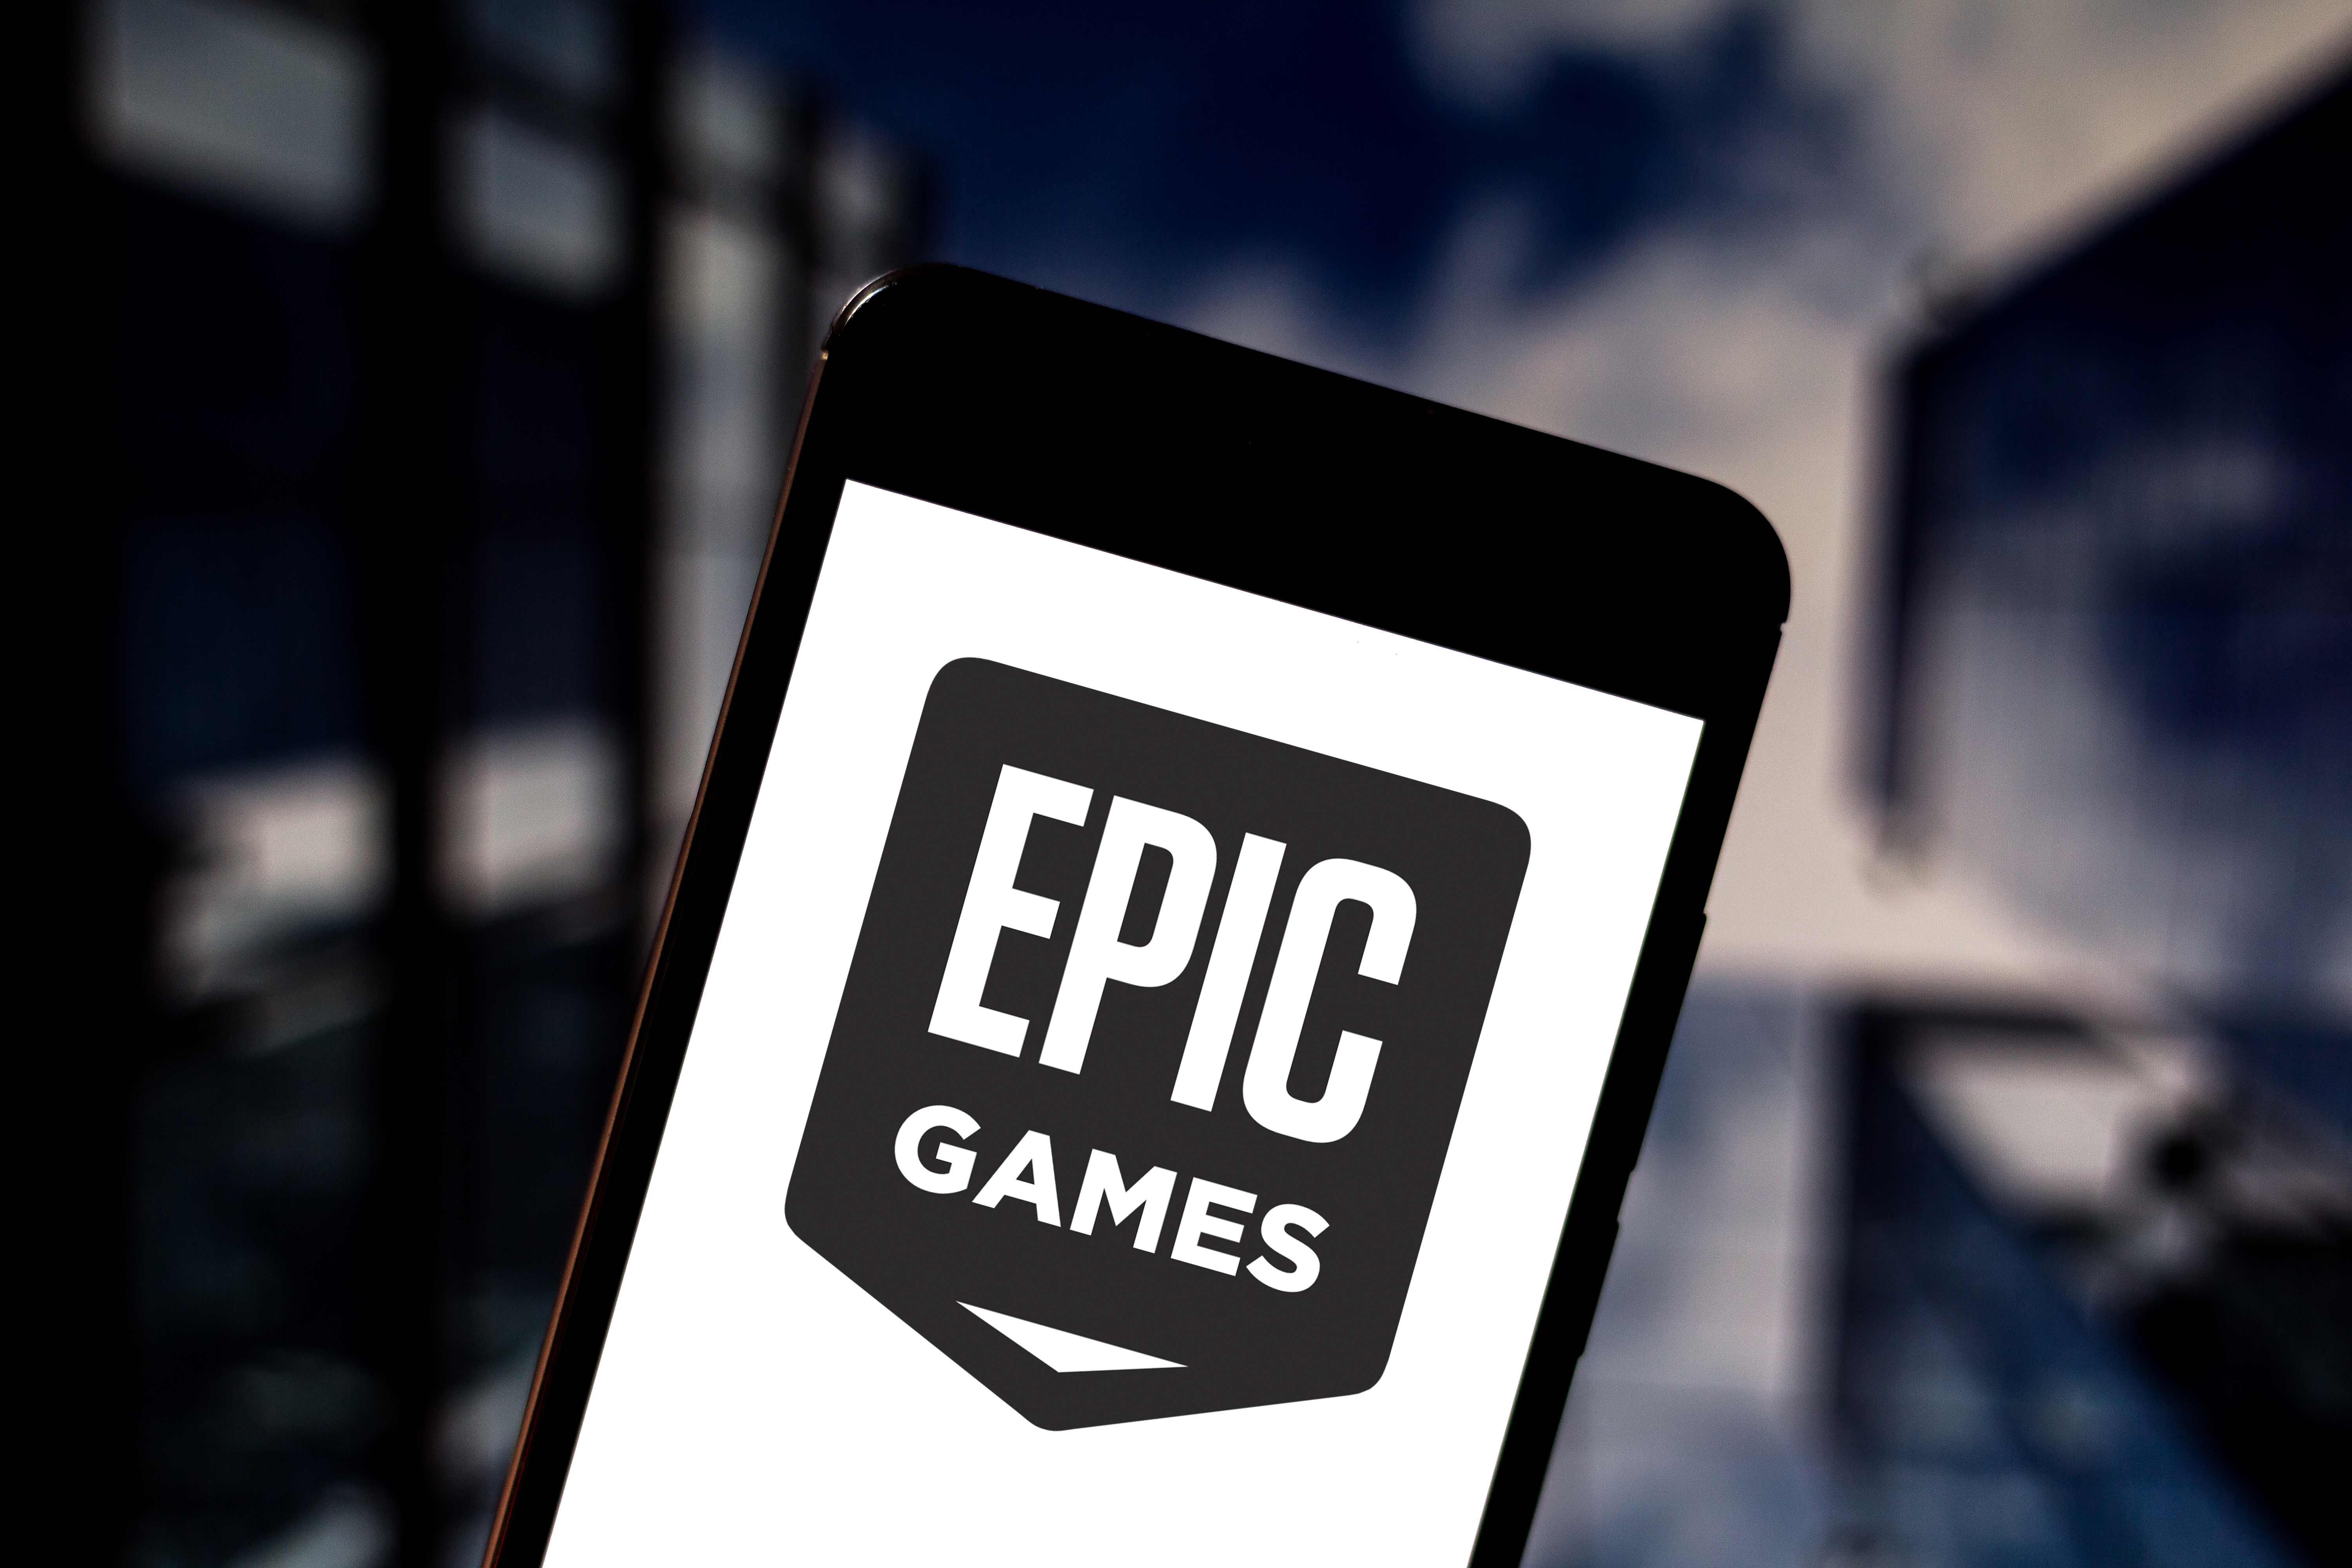 Epic Games Fires 870 Because of Fortnite's Lower Profits